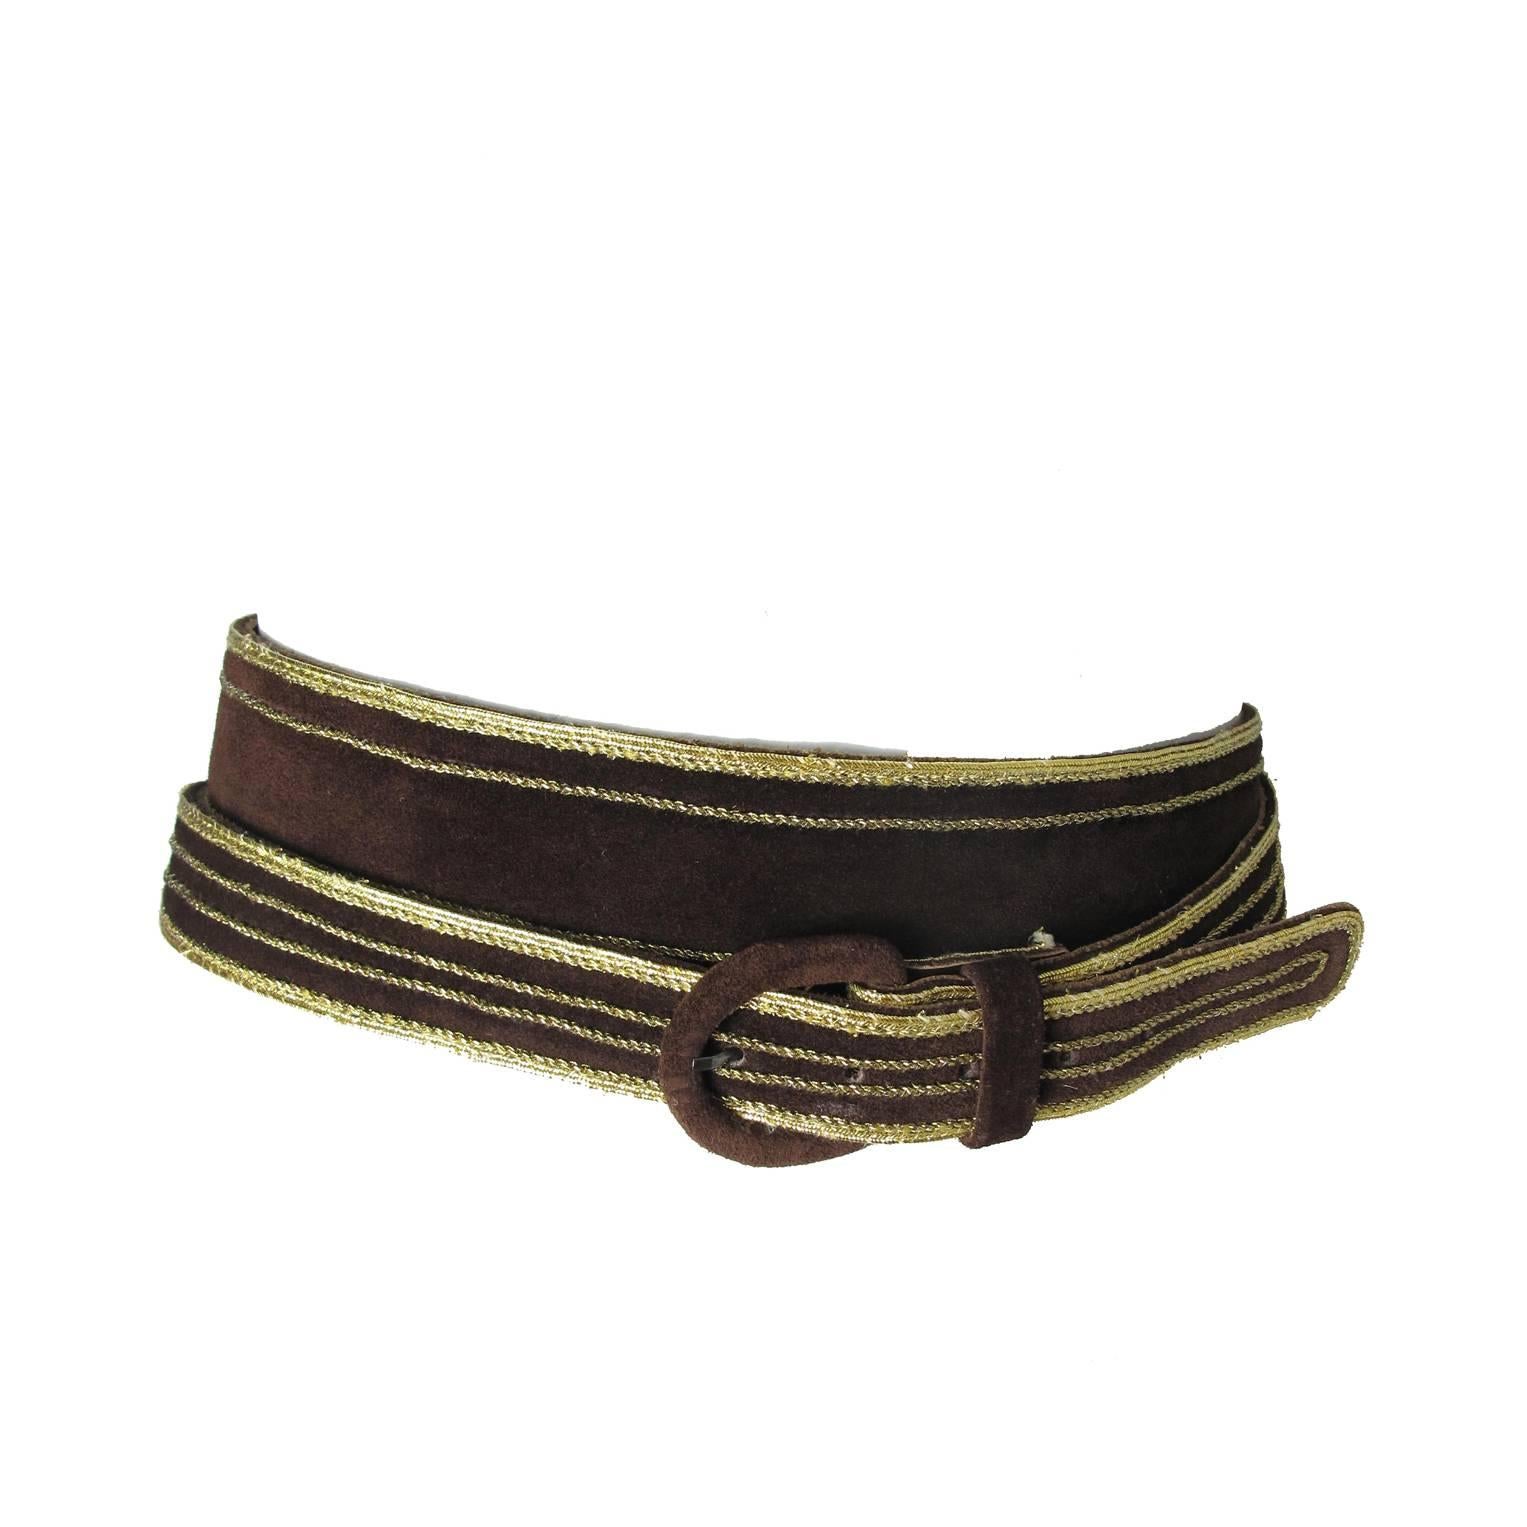 Late 70s - Early 80s Yves Saint Laurent Brown Suede Wrap Waist Belt